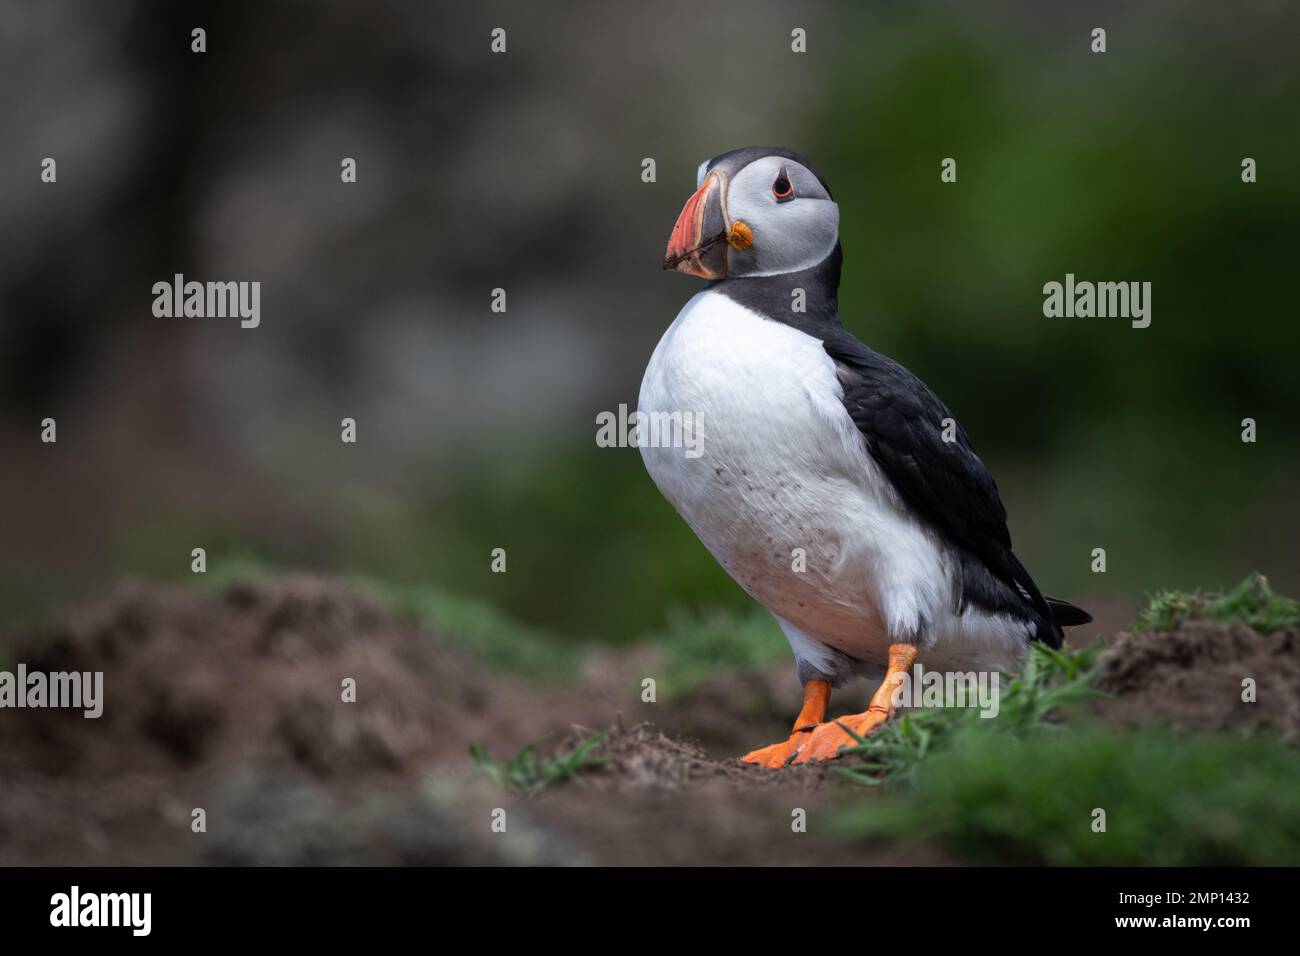 A full portrait of an atlantic puffin as it stands on grass near the cliff top. It shows the full length and body of the bird Stock Photo